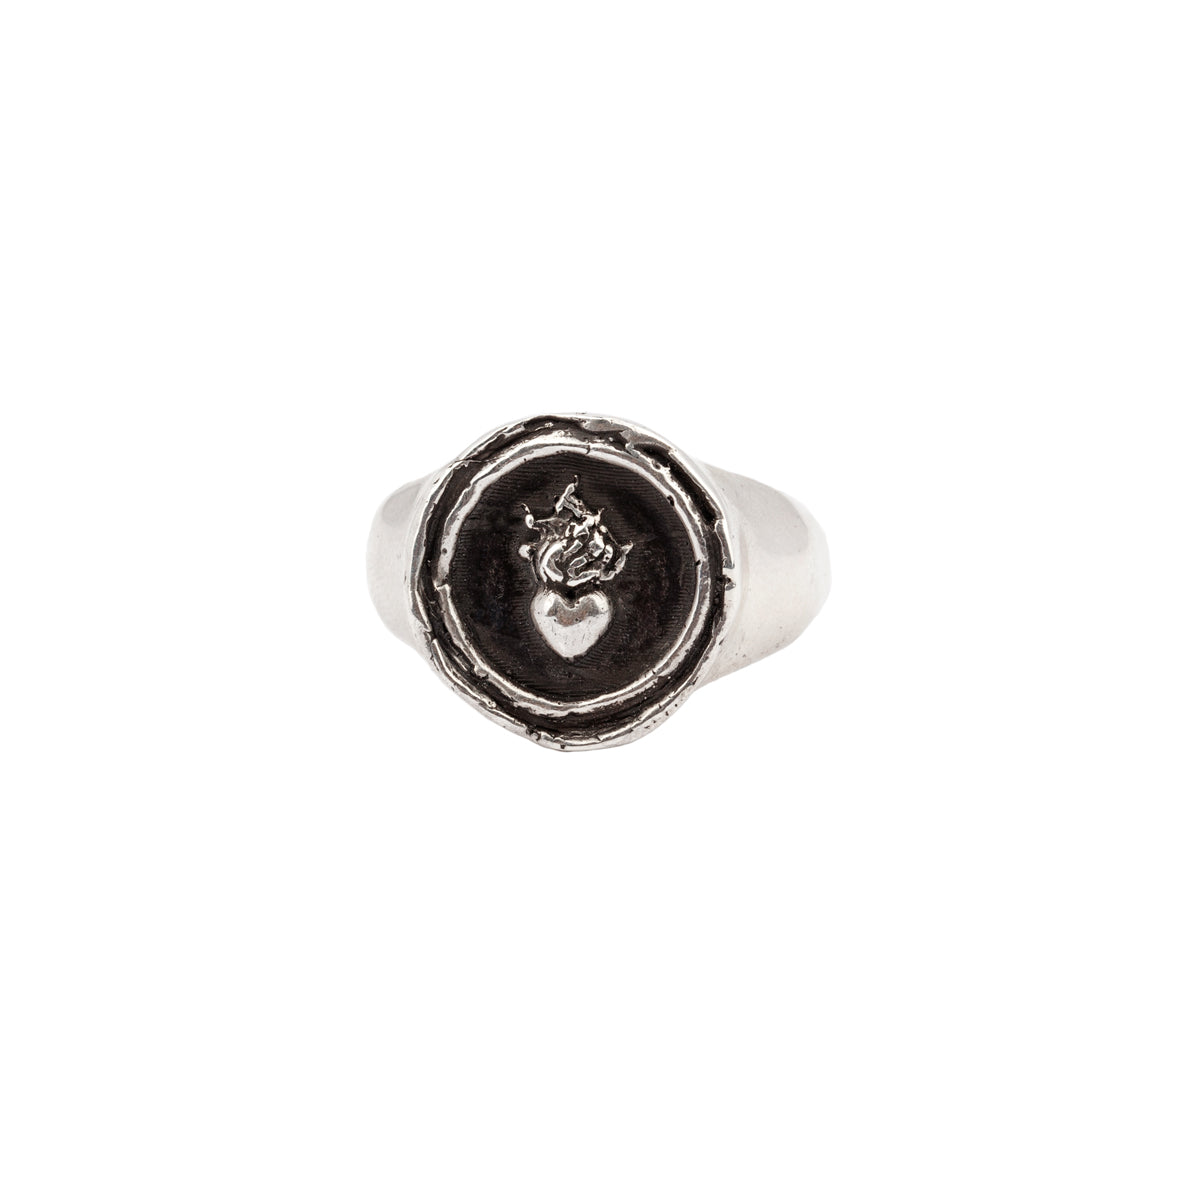 A sterling silver signet ring with our silver Flaming Heart talisman.